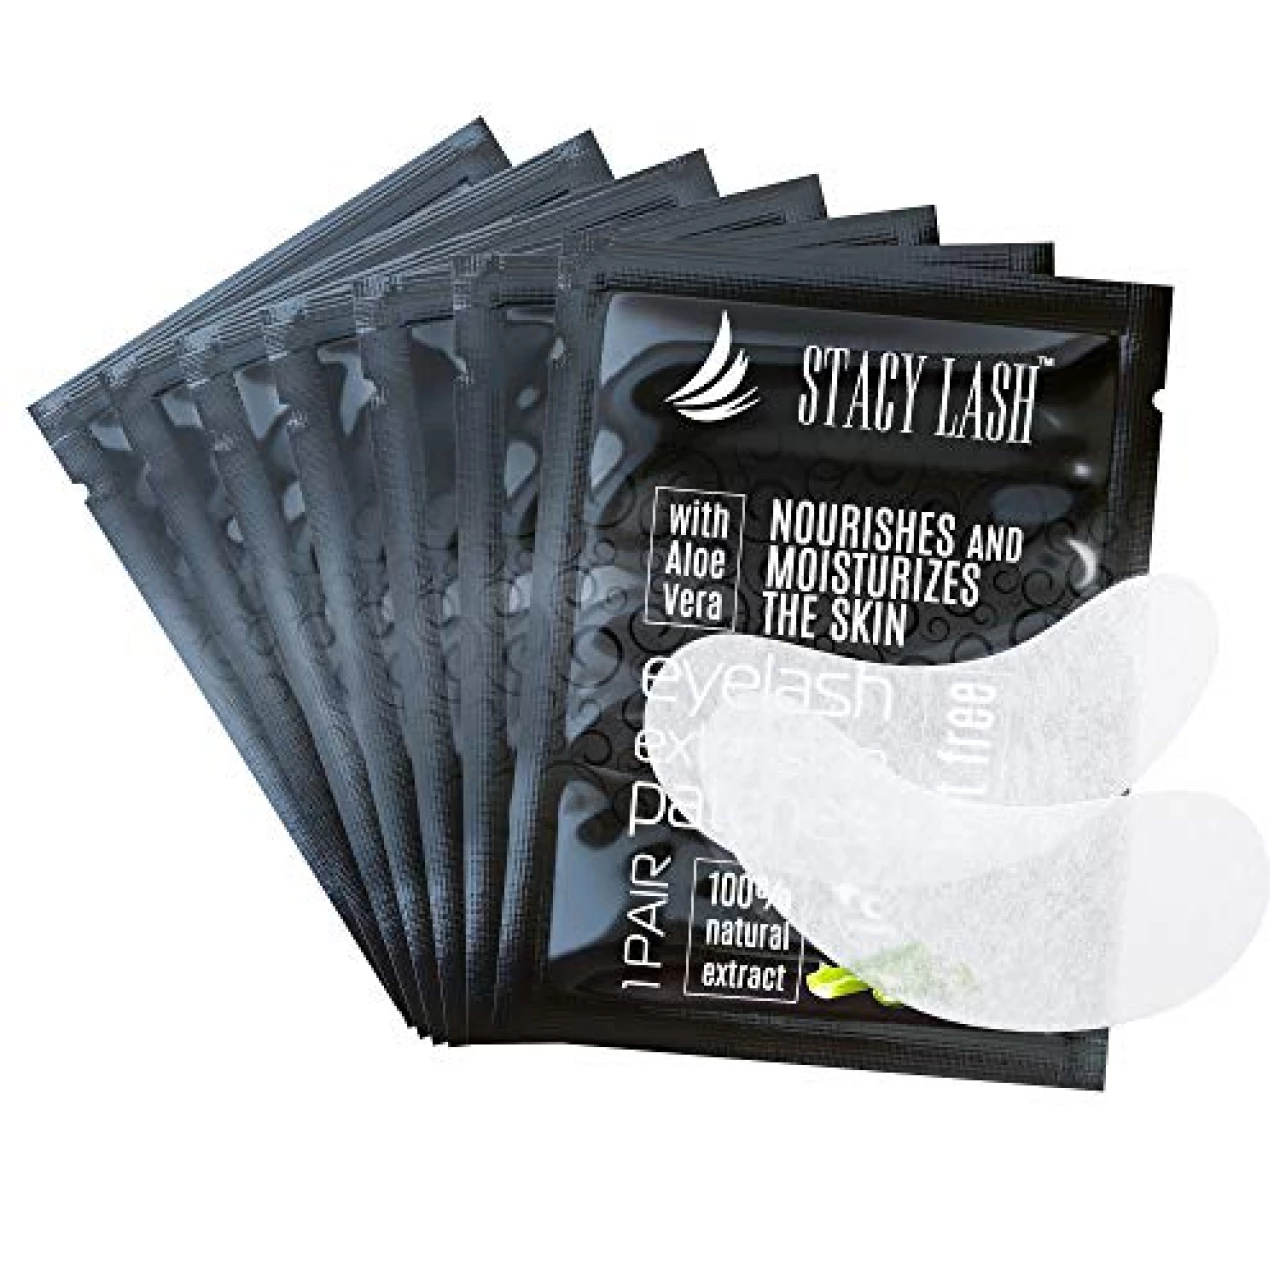 100 Pairs Set Premium Under Eye Gel Pads for Eyelash Extension - Lint Free Patches with Vitamin C and Aloe Vera by Stacy Lash supplies and Beauty tools - Hydrogel Eye Pads - Skin Moisturizes